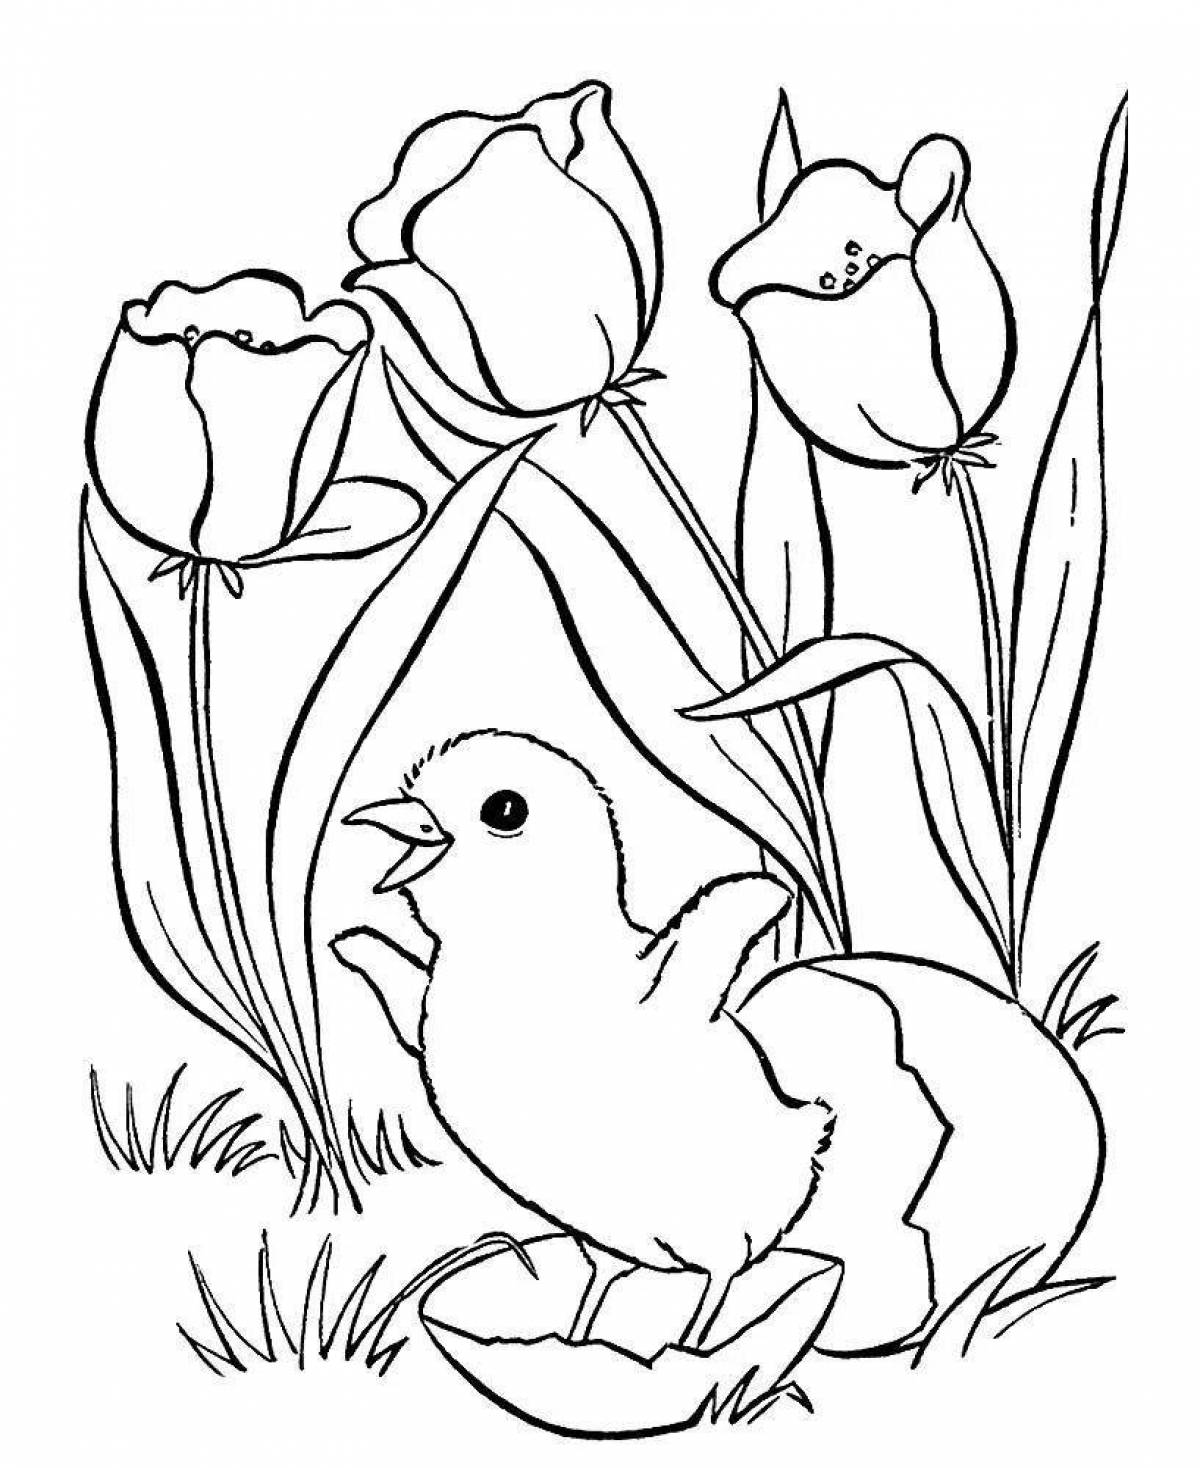 Exciting coloring for girls nature and flowers animals